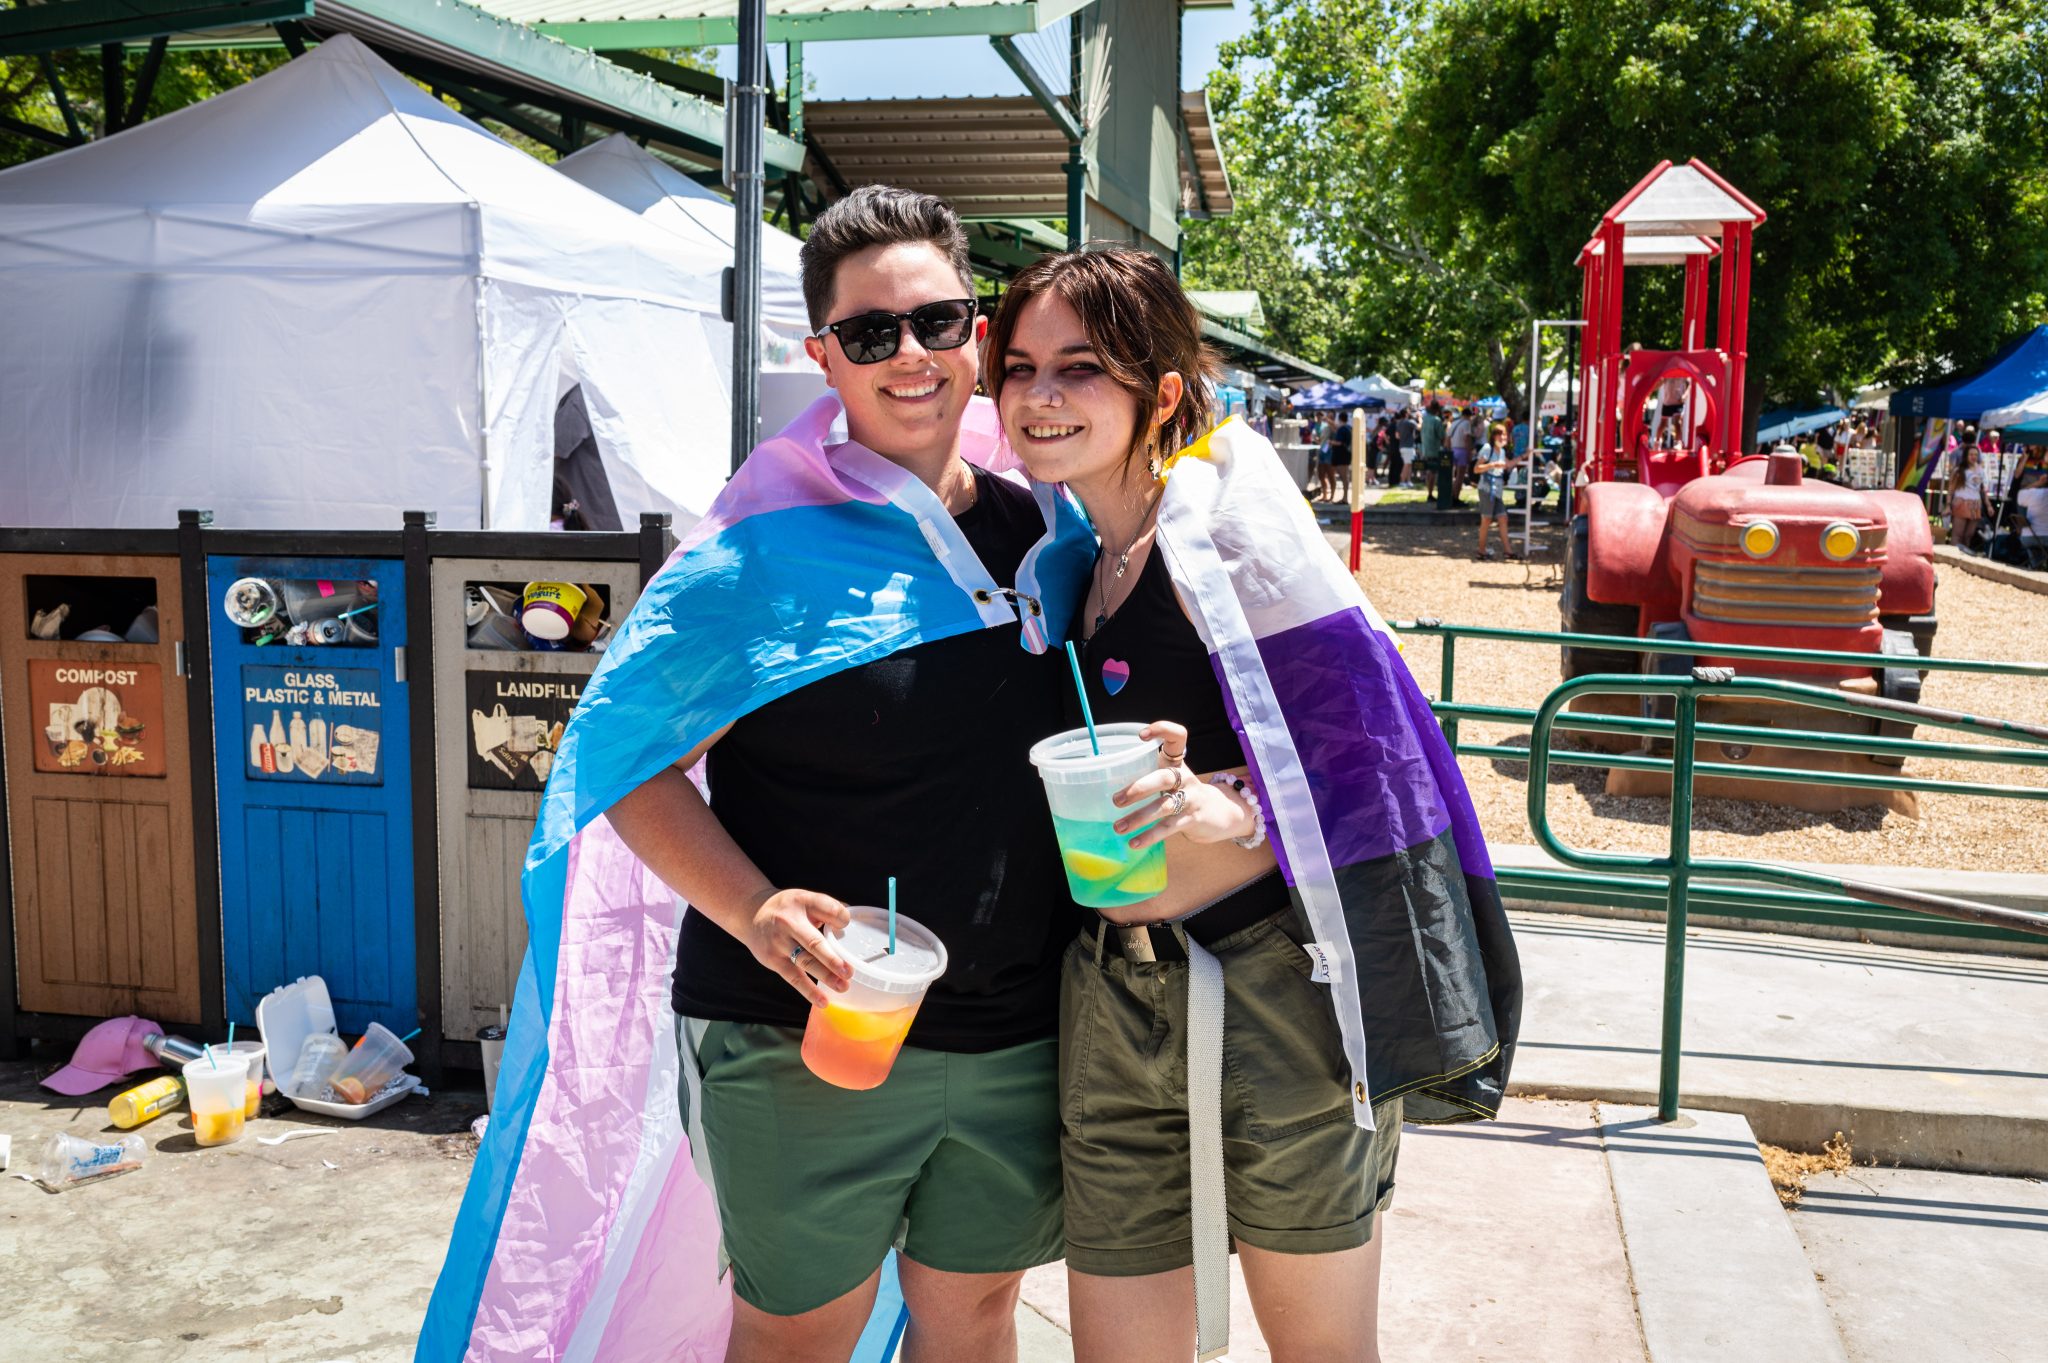 micara and daniel, queer couple, bisexual flag, cape, davis pride, davis, california, pride month, gay community, event, chris allan, freelance photojournalist, news photography, lgbtq, event, colorful